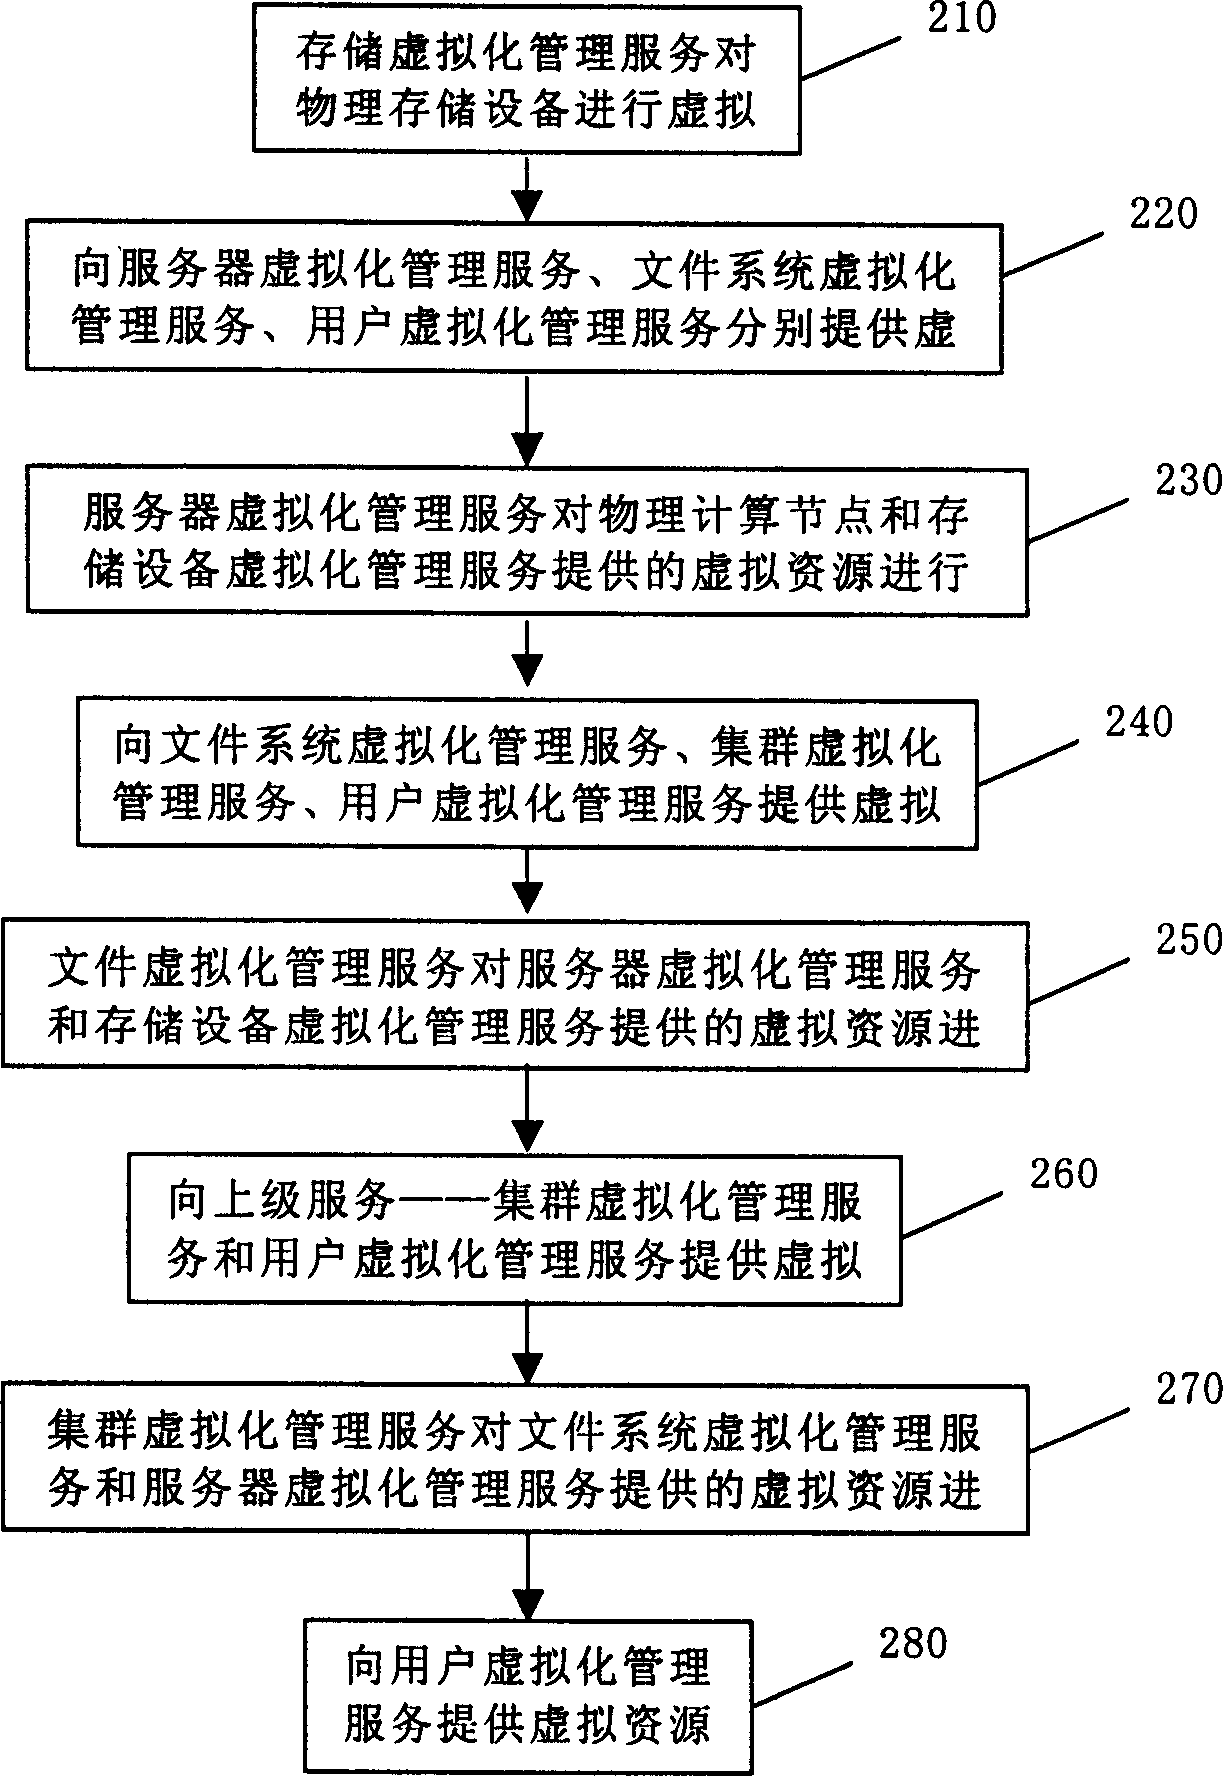 Management system and method for large service system based on network storage and resource virtual process